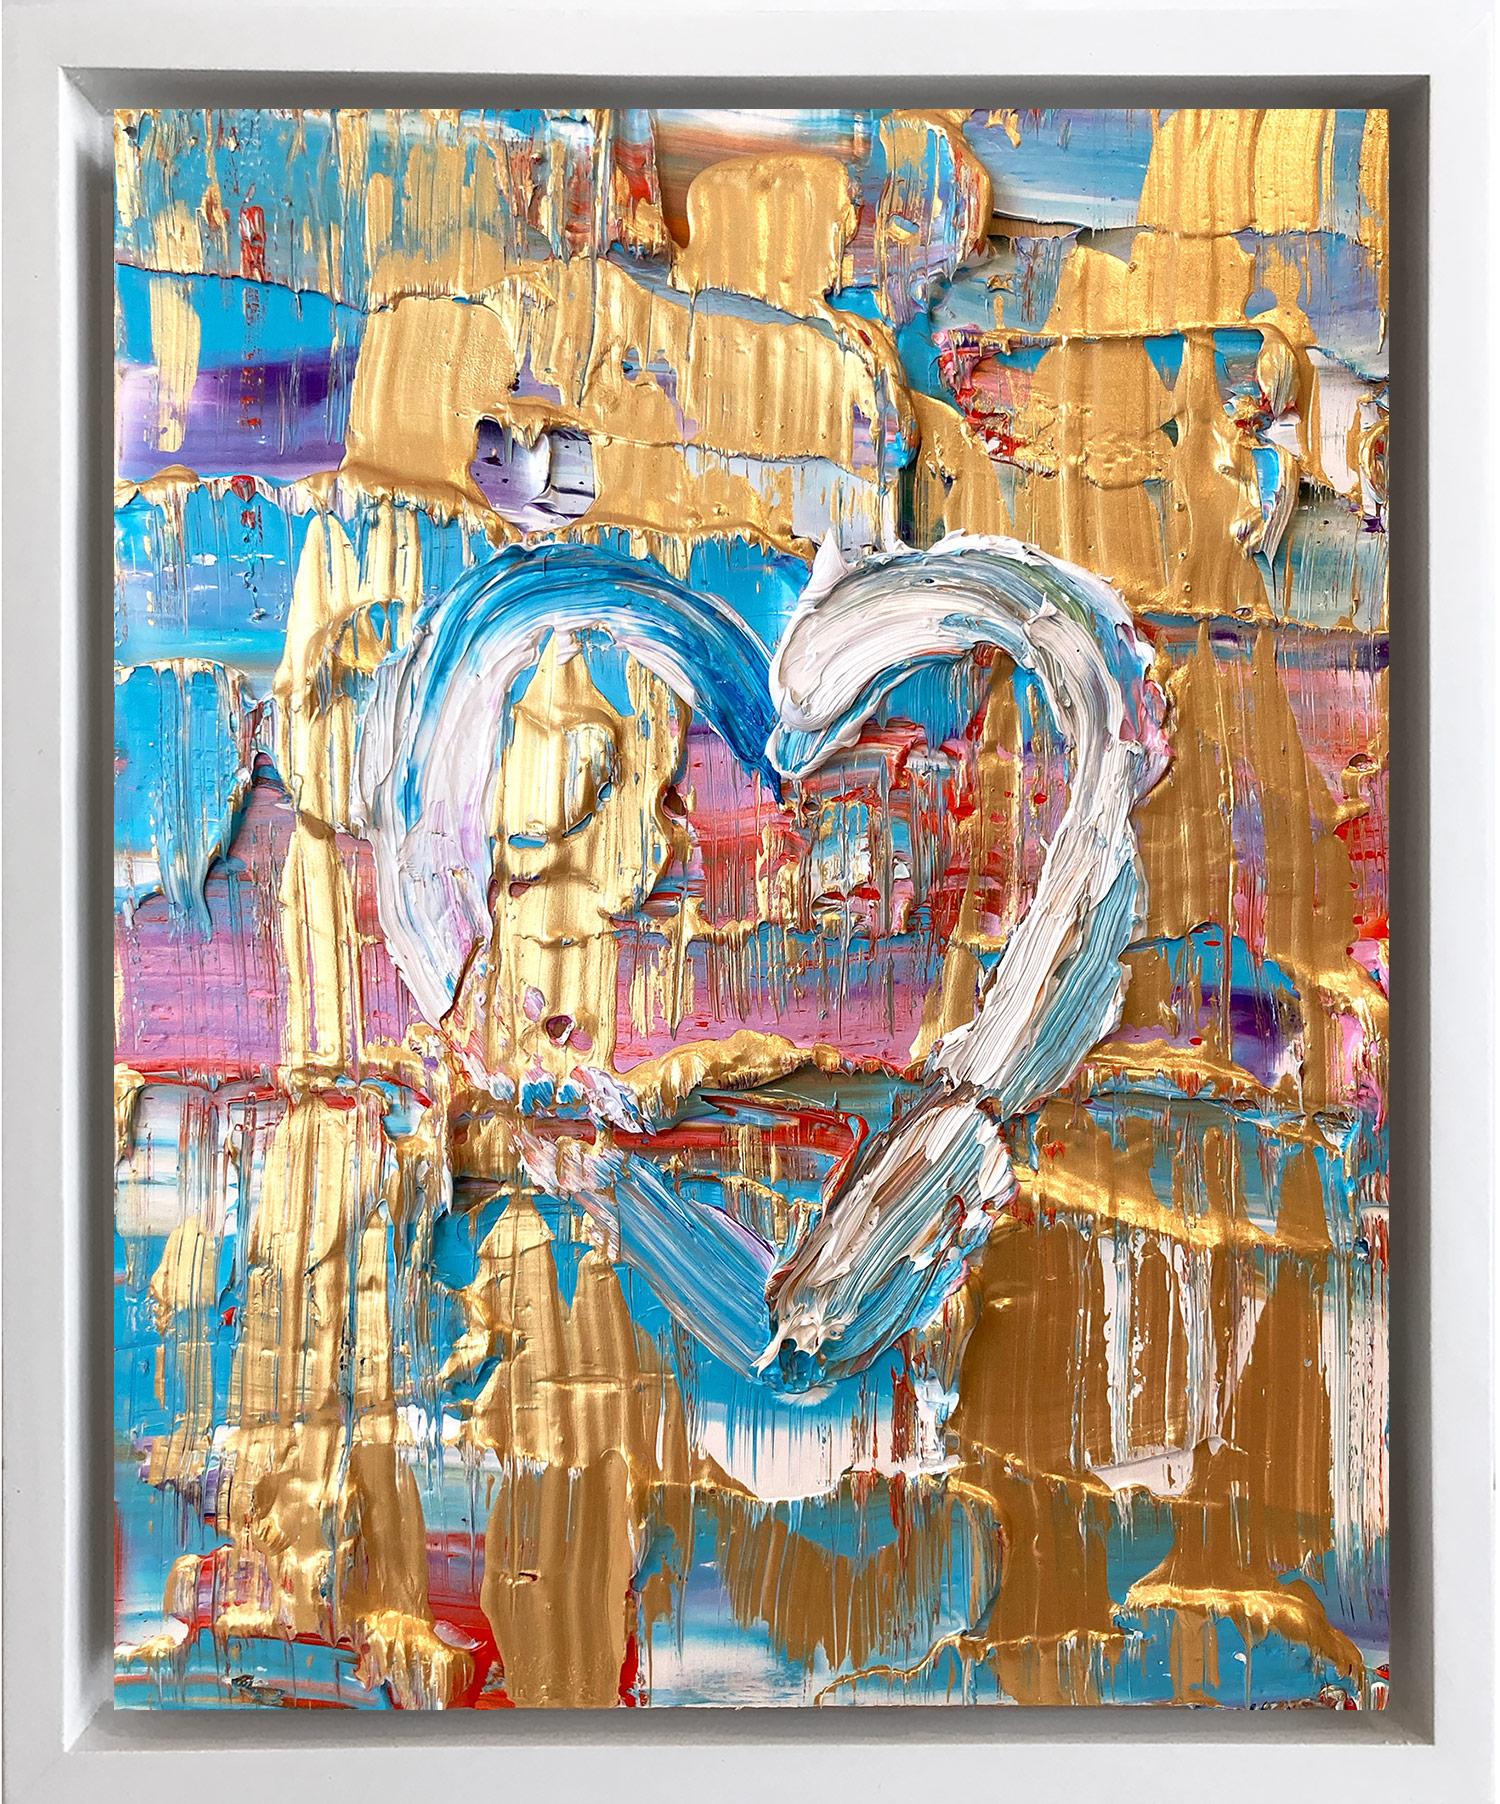 Cindy Shaoul Figurative Painting - "My Raspberry Crush Heart" Contemporary Oil Painting Framed w Floater Frame